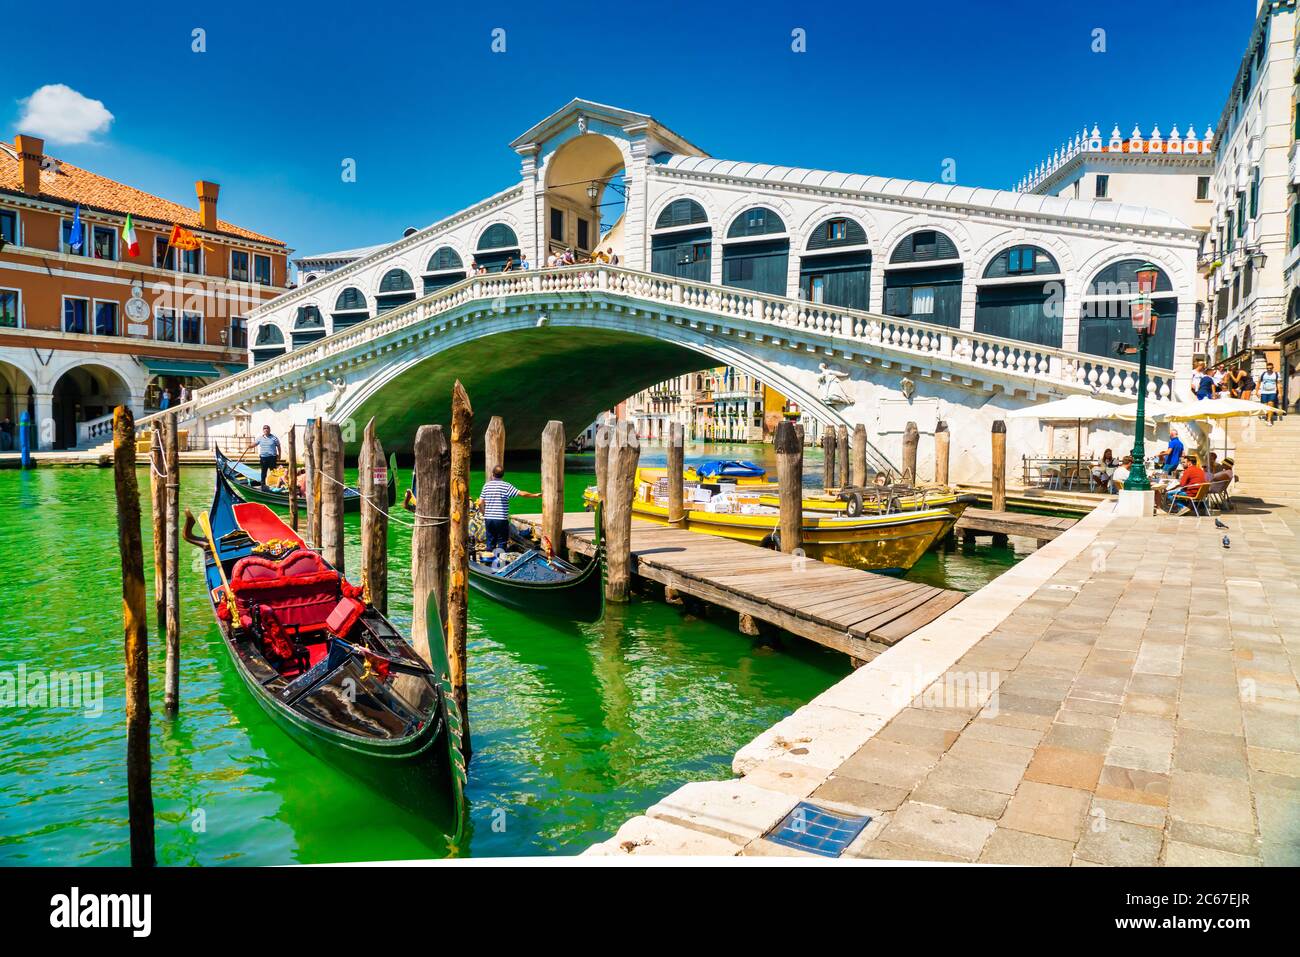 Venice, Italy - june 29th 2020 - very little tourists crossing the Grand Canal over the Rialto bridge (Ponte di Rialto) with workless gondolier on a s Stock Photo